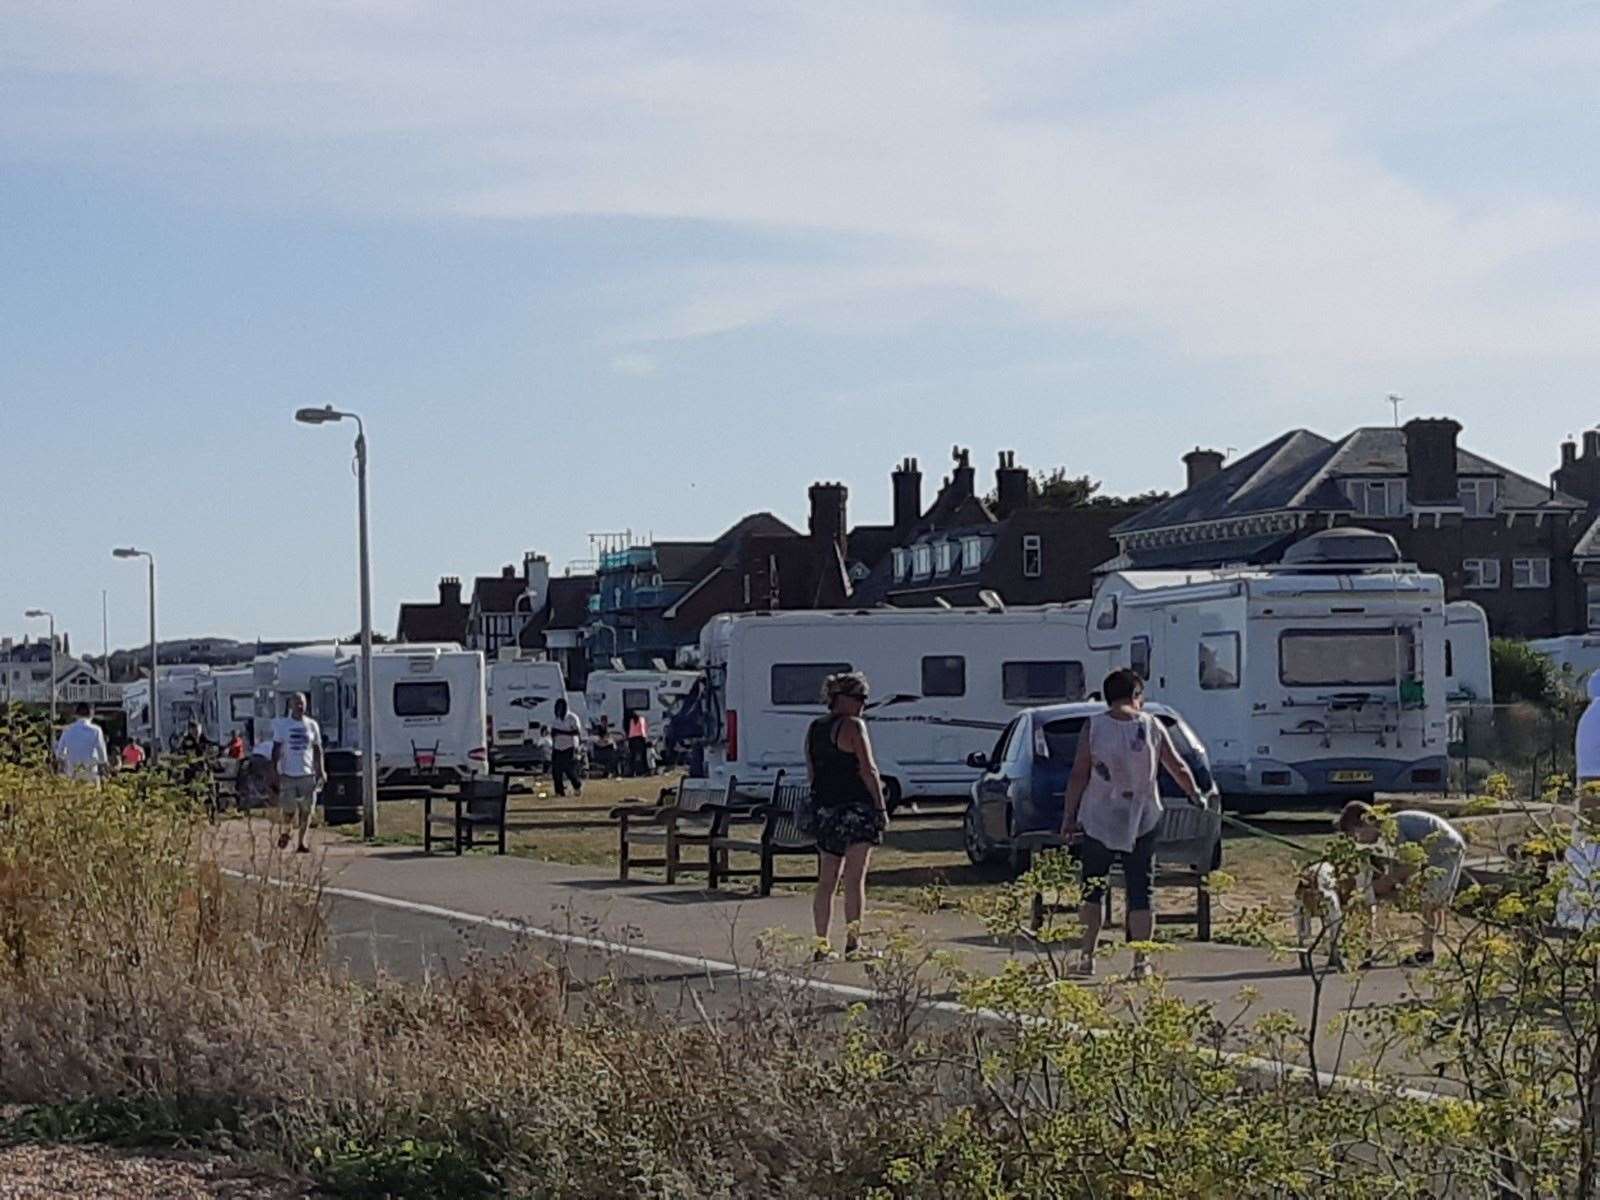 Caravans also pitched up at Deal Castle in August this year